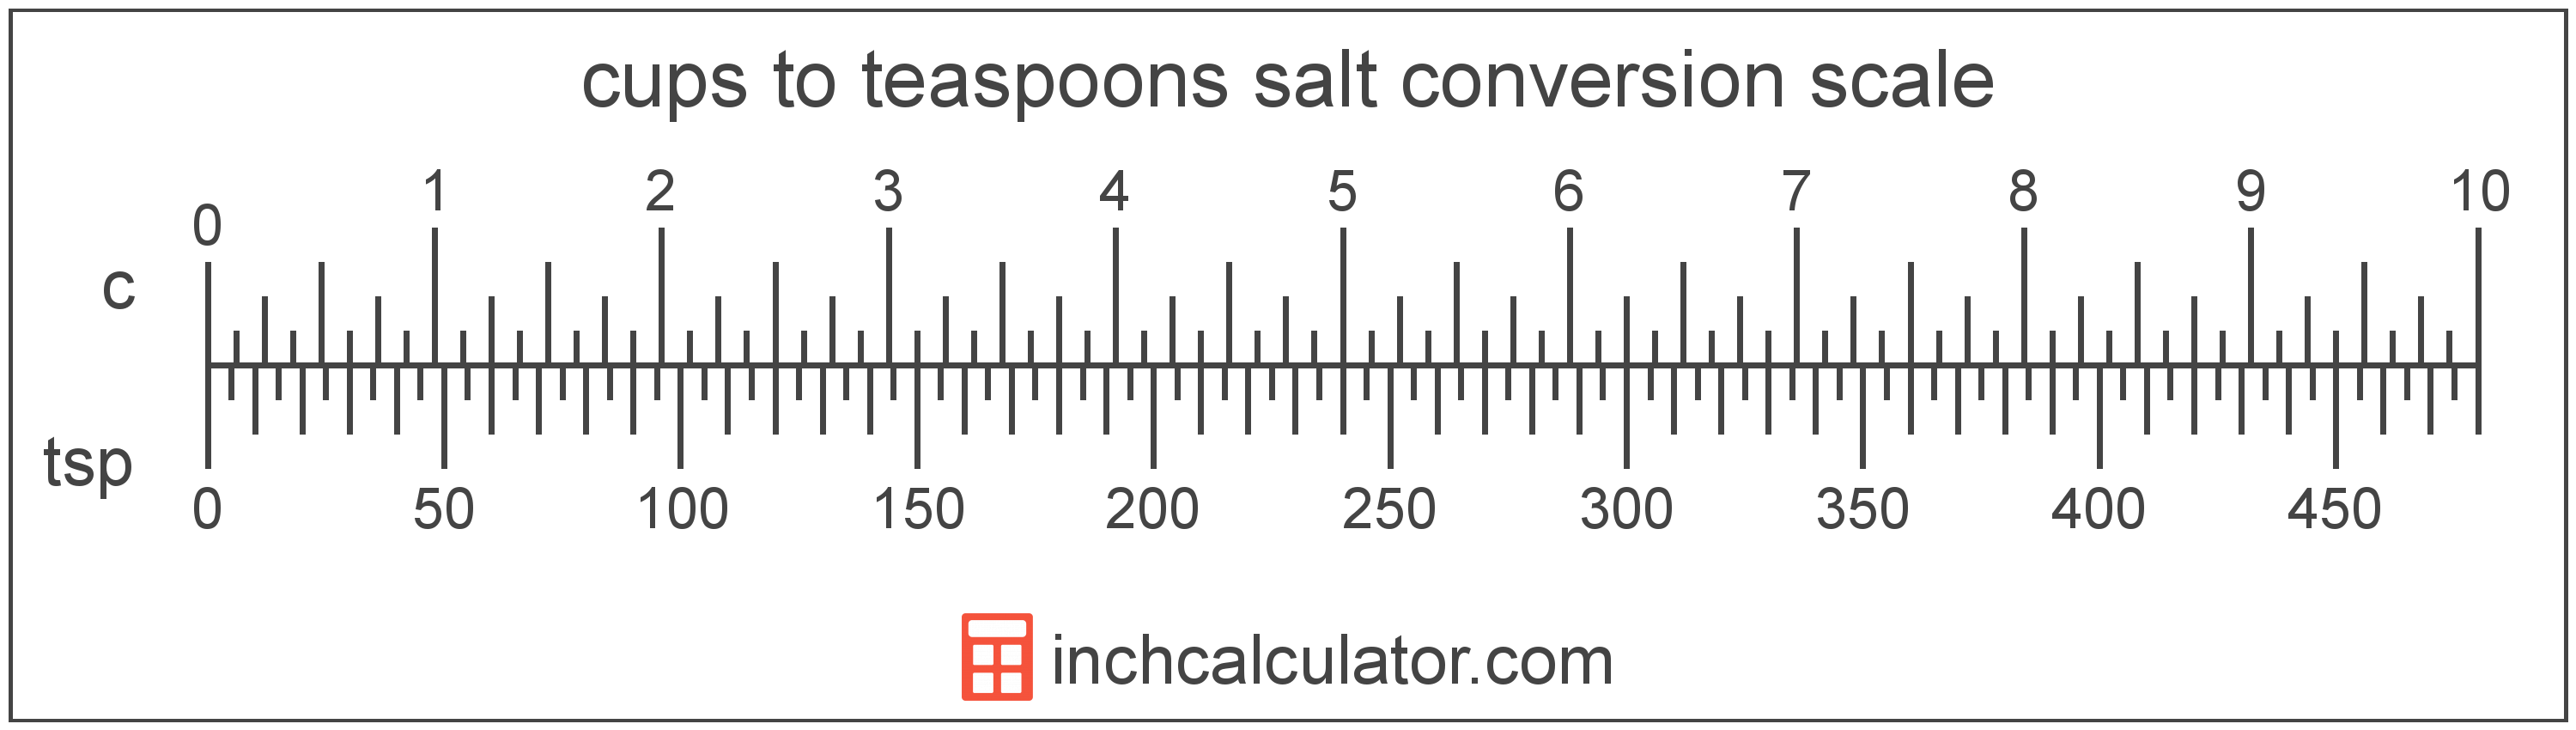 conversion scale showing cups and equivalent teaspoons amount of salt values